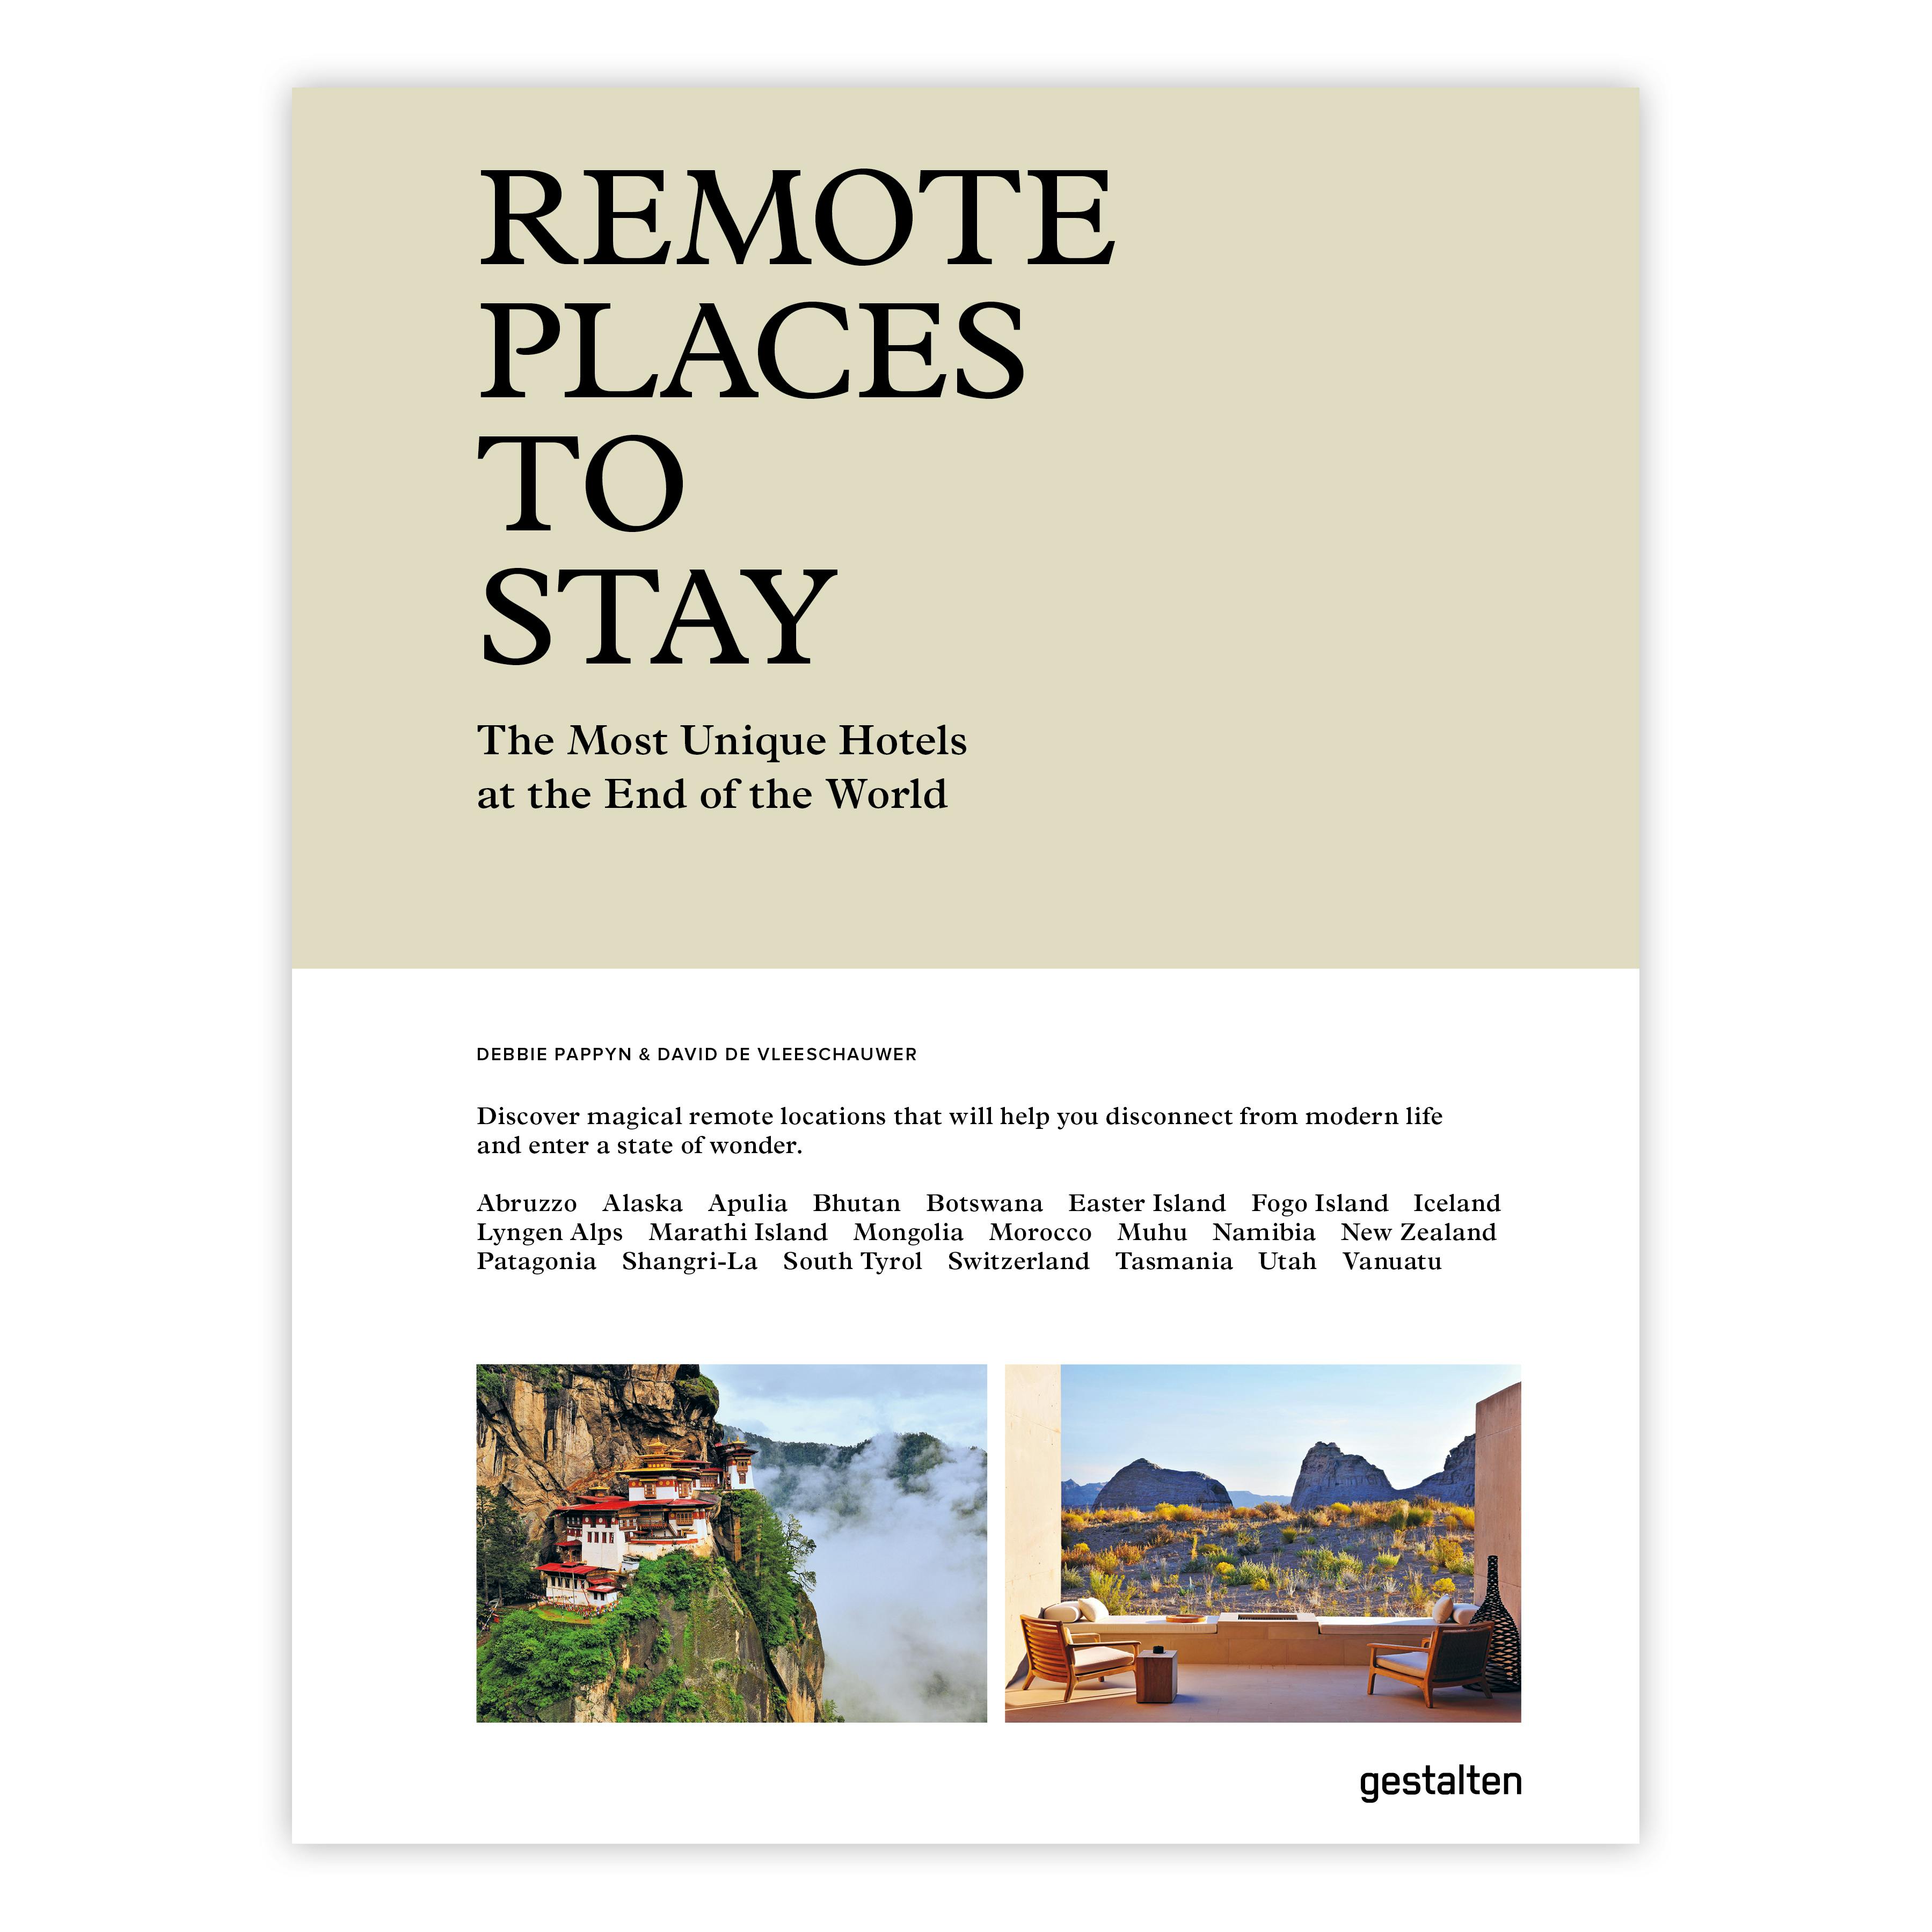 Remote Places to Stay - Coffee Table Book